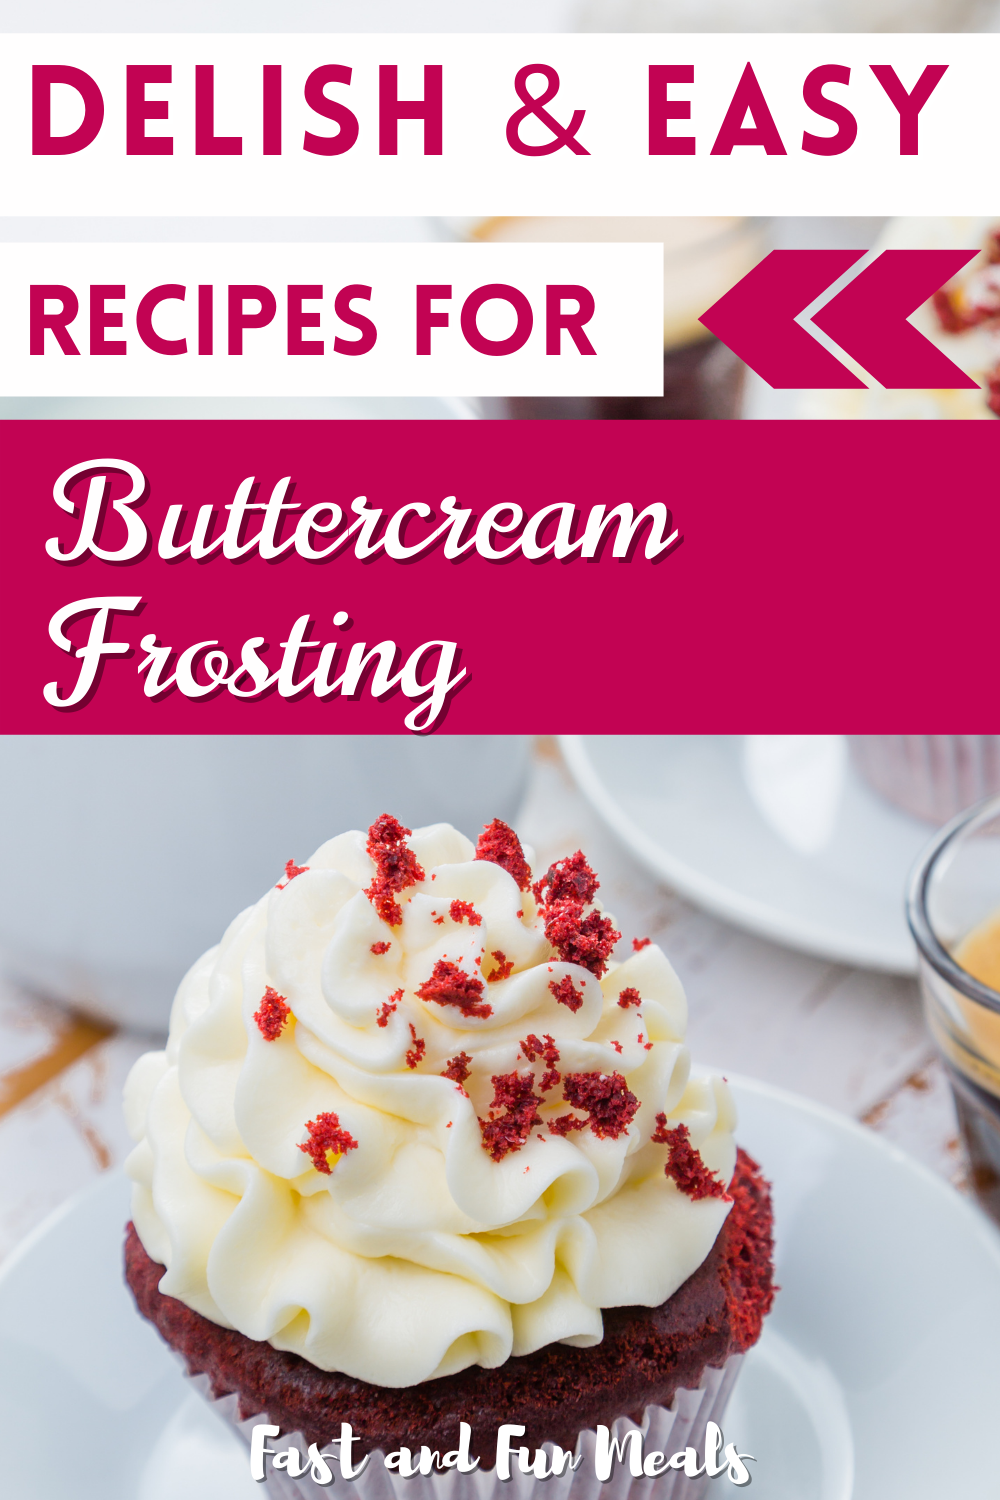 Pin showing the title Easy and Delish Recipes for Buttercream Frosting